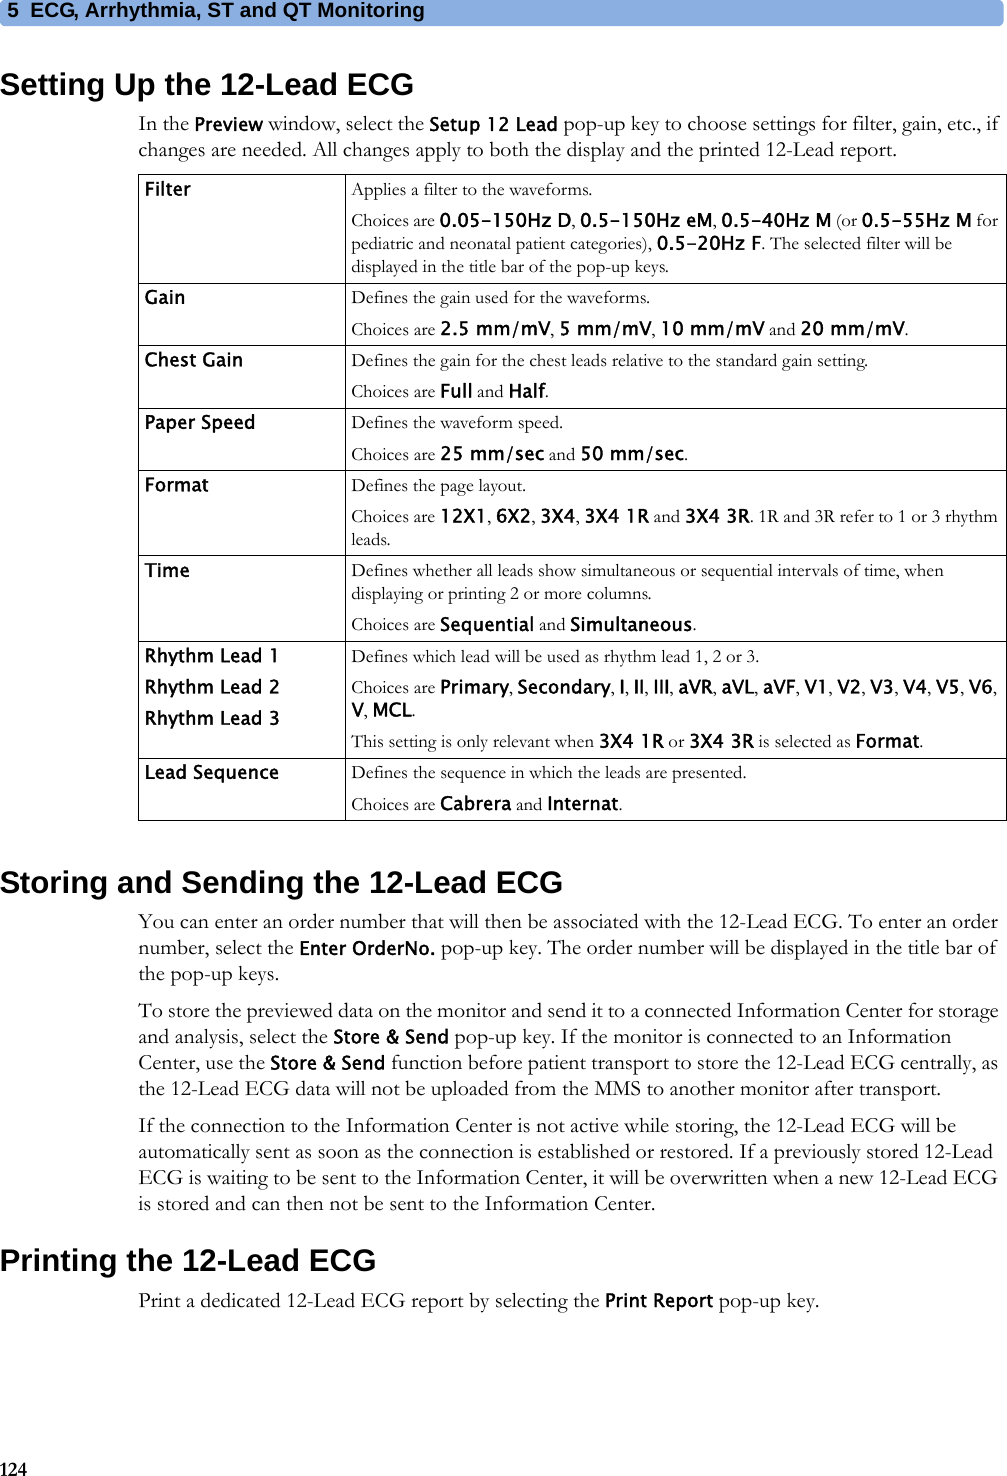 5 ECG, Arrhythmia, ST and QT Monitoring124Setting Up the 12-Lead ECGIn the Preview window, select the Setup 12 Lead pop-up key to choose settings for filter, gain, etc., if changes are needed. All changes apply to both the display and the printed 12-Lead report.Storing and Sending the 12-Lead ECGYou can enter an order number that will then be associated with the 12-Lead ECG. To enter an order number, select the Enter OrderNo. pop-up key. The order number will be displayed in the title bar of the pop-up keys.To store the previewed data on the monitor and send it to a connected Information Center for storage and analysis, select the Store &amp; Send pop-up key. If the monitor is connected to an Information Center, use the Store &amp; Send function before patient transport to store the 12-Lead ECG centrally, as the 12-Lead ECG data will not be uploaded from the MMS to another monitor after transport.If the connection to the Information Center is not active while storing, the 12-Lead ECG will be automatically sent as soon as the connection is established or restored. If a previously stored 12-Lead ECG is waiting to be sent to the Information Center, it will be overwritten when a new 12-Lead ECG is stored and can then not be sent to the Information Center.Printing the 12-Lead ECGPrint a dedicated 12-Lead ECG report by selecting the Print Report pop-up key.Filter Applies a filter to the waveforms.Choices are 0.05-150Hz D, 0.5-150Hz eM, 0.5-40Hz M (or 0.5-55Hz M for pediatric and neonatal patient categories), 0.5-20Hz F. The selected filter will be displayed in the title bar of the pop-up keys.Gain Defines the gain used for the waveforms.Choices are 2.5 mm/mV, 5 mm/mV, 10 mm/mV and 20 mm/mV.Chest Gain Defines the gain for the chest leads relative to the standard gain setting.Choices are Full and Half.Paper Speed Defines the waveform speed.Choices are 25 mm/sec and 50 mm/sec.Format Defines the page layout.Choices are 12X1, 6X2, 3X4, 3X4 1R and 3X4 3R. 1R and 3R refer to 1 or 3 rhythm leads.Time Defines whether all leads show simultaneous or sequential intervals of time, when displaying or printing 2 or more columns.Choices are Sequential and Simultaneous.Rhythm Lead 1Rhythm Lead 2Rhythm Lead 3Defines which lead will be used as rhythm lead 1, 2 or 3.Choices are Primary, Secondary, I, II, III, aVR, aVL, aVF, V1, V2, V3, V4, V5, V6, V, MCL.This setting is only relevant when 3X4 1R or 3X4 3R is selected as Format.Lead Sequence Defines the sequence in which the leads are presented.Choices are Cabrera and Internat.